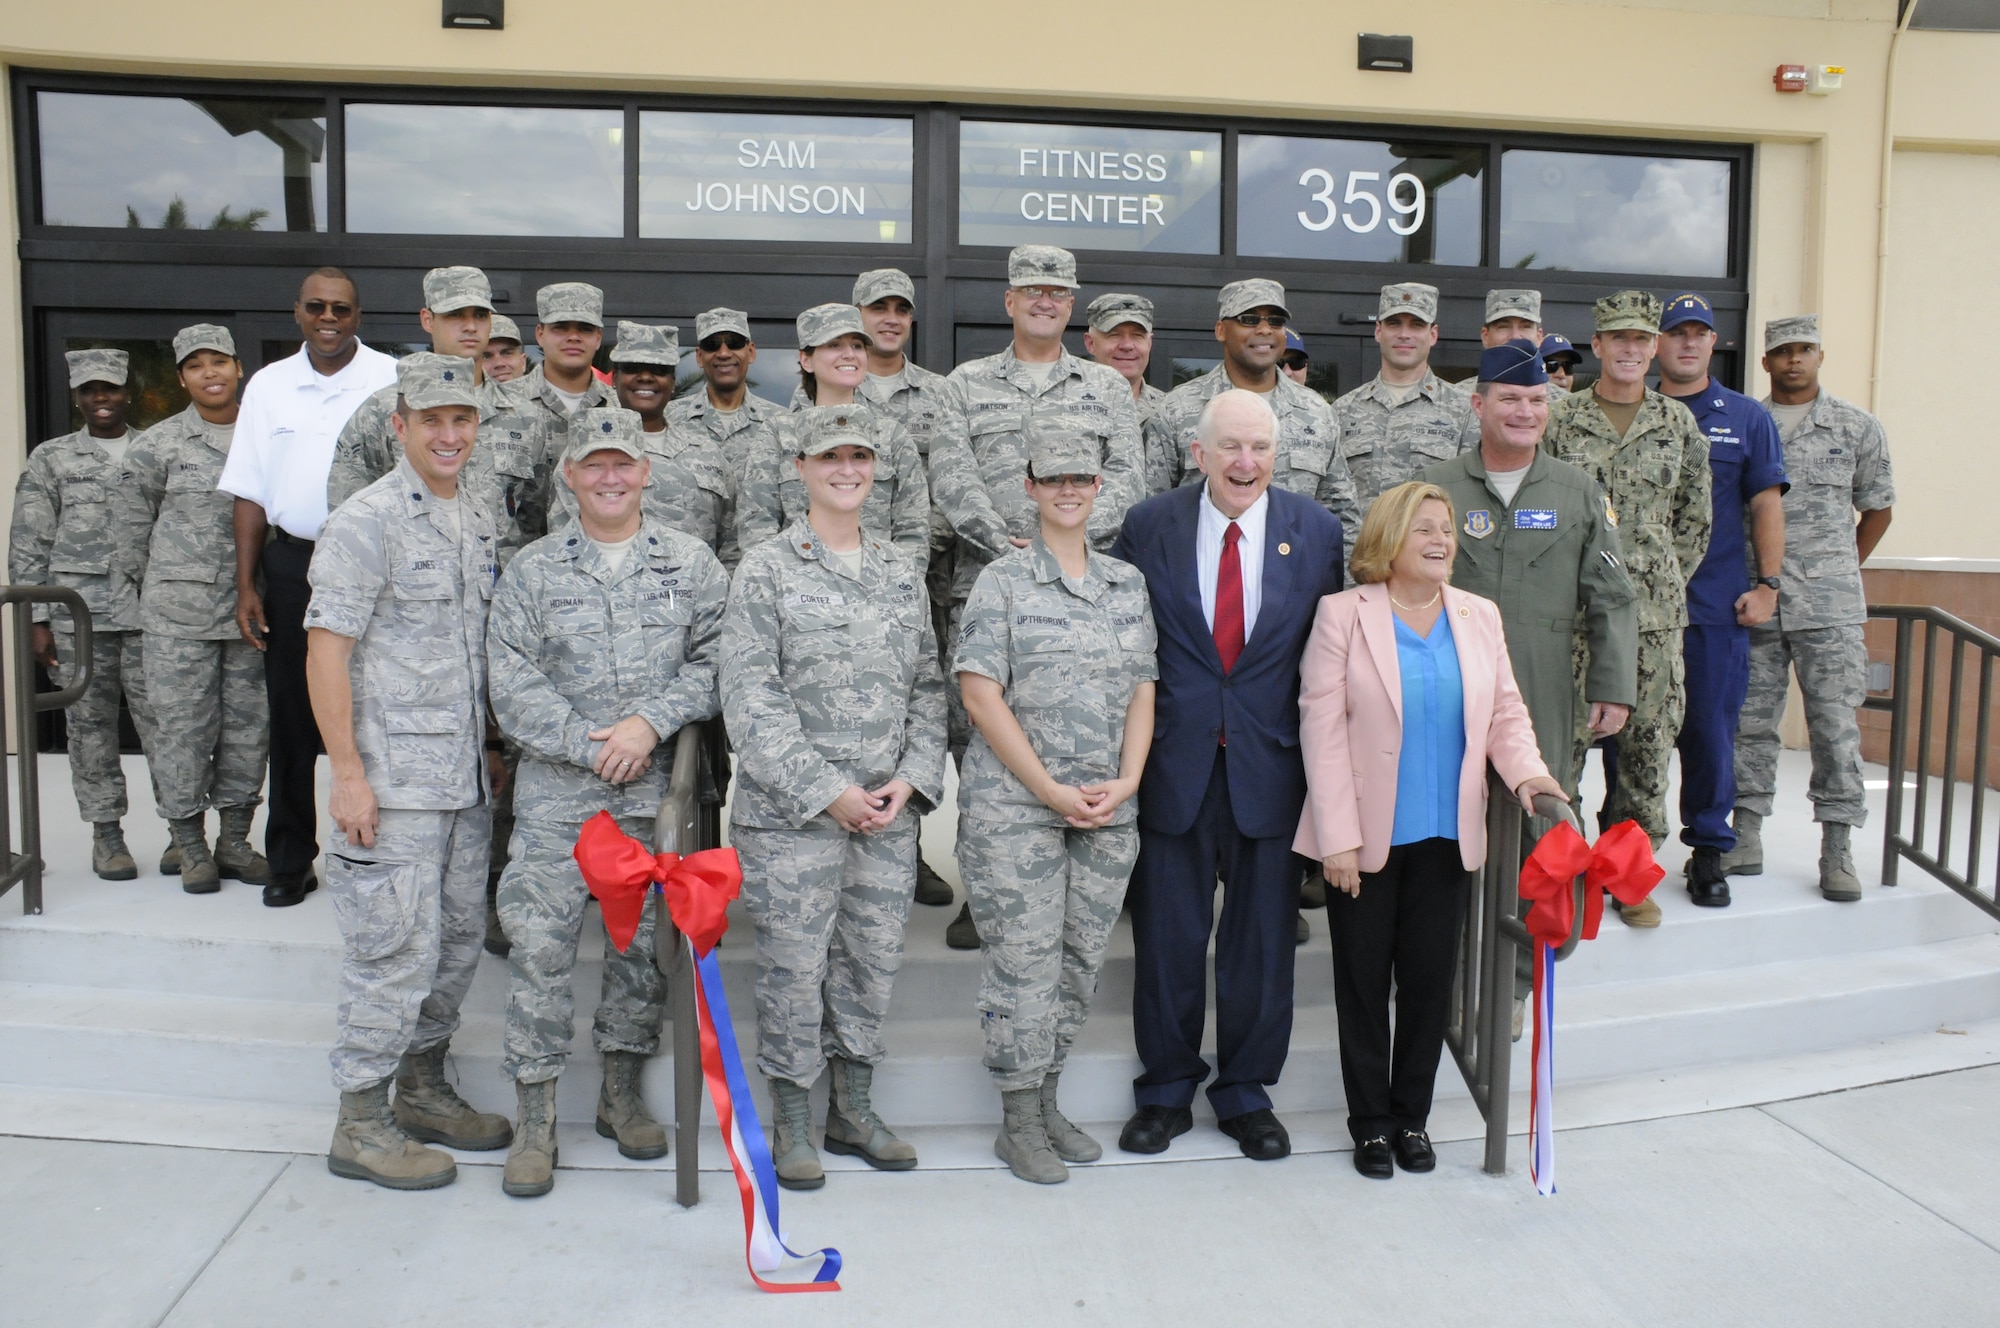 Members from Homestead Air Reserve Base gather together around the newly renovated Sam Johnson Fitness Center. Congressman Sam Johnson, representing the 3rd District of Texas, came to the base for the ribbon cutting of the fitness center, which is named after the congressman Aug. 20. Congresswoman Ileana Ros-Lehtinen, representing Florida’s 27th Congressional District, also attended the ribbon cutting events. (Air Force photo/Senior Airman Nicolas Caceres)